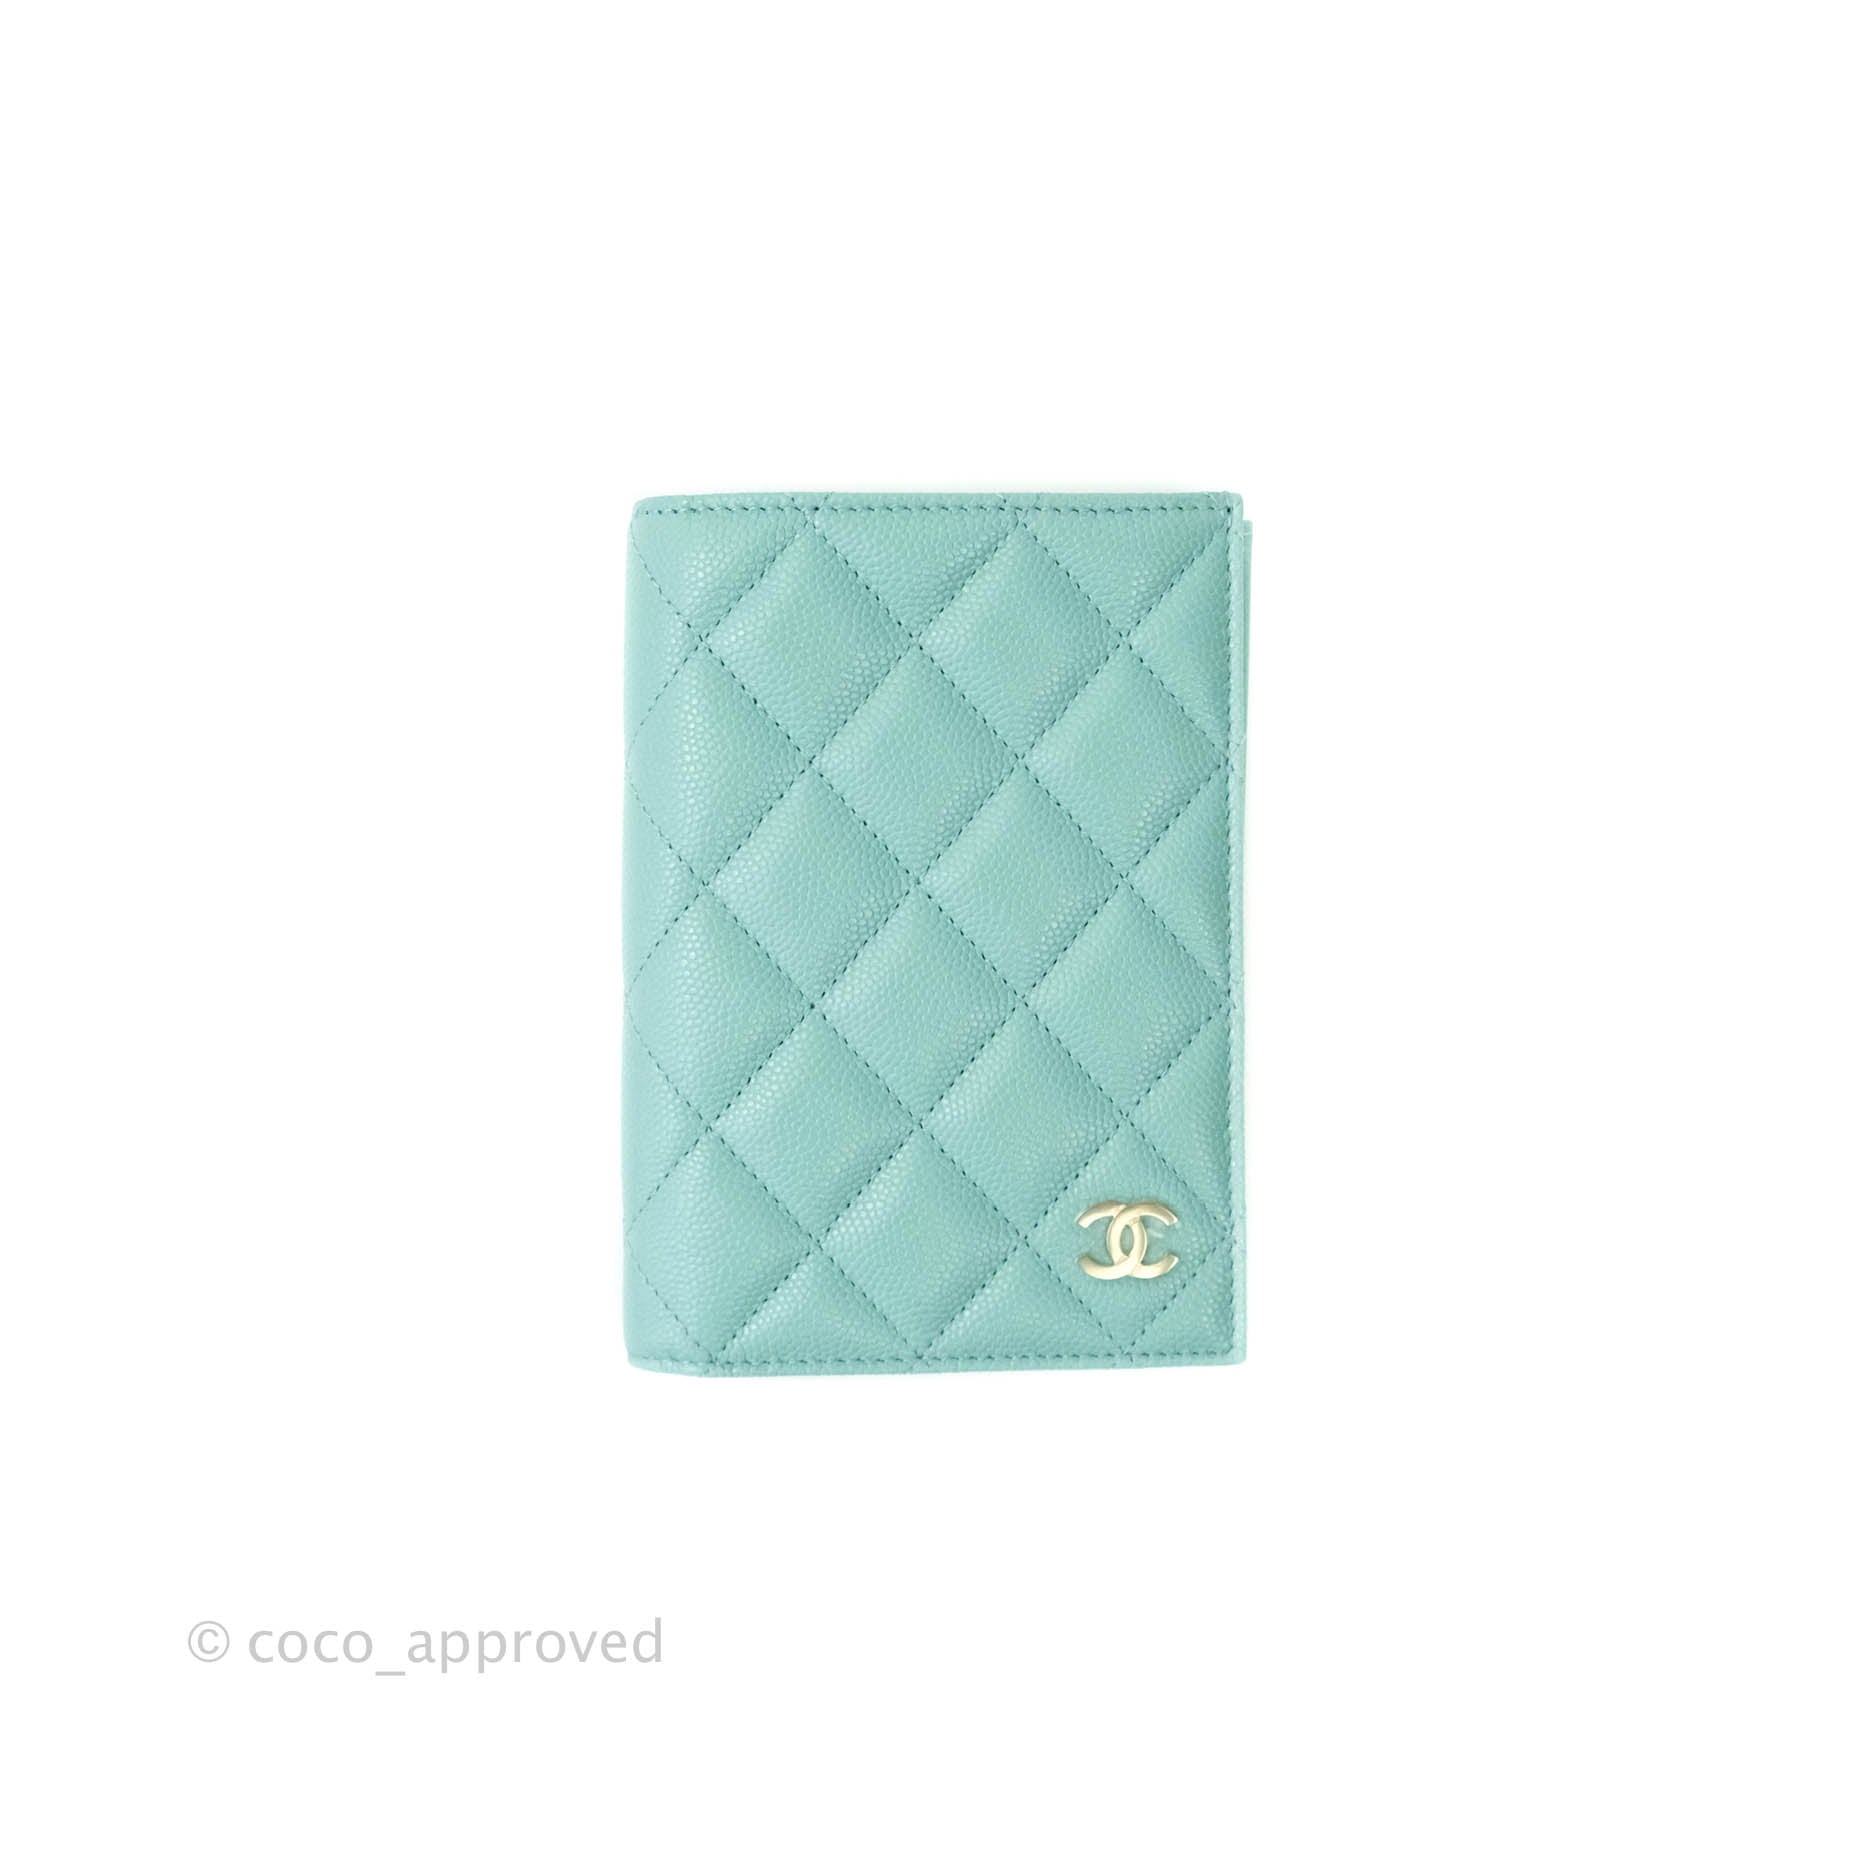 Chanel Quilted Caviar Mint Passport Holder Gold Hardware – Coco Approved  Studio